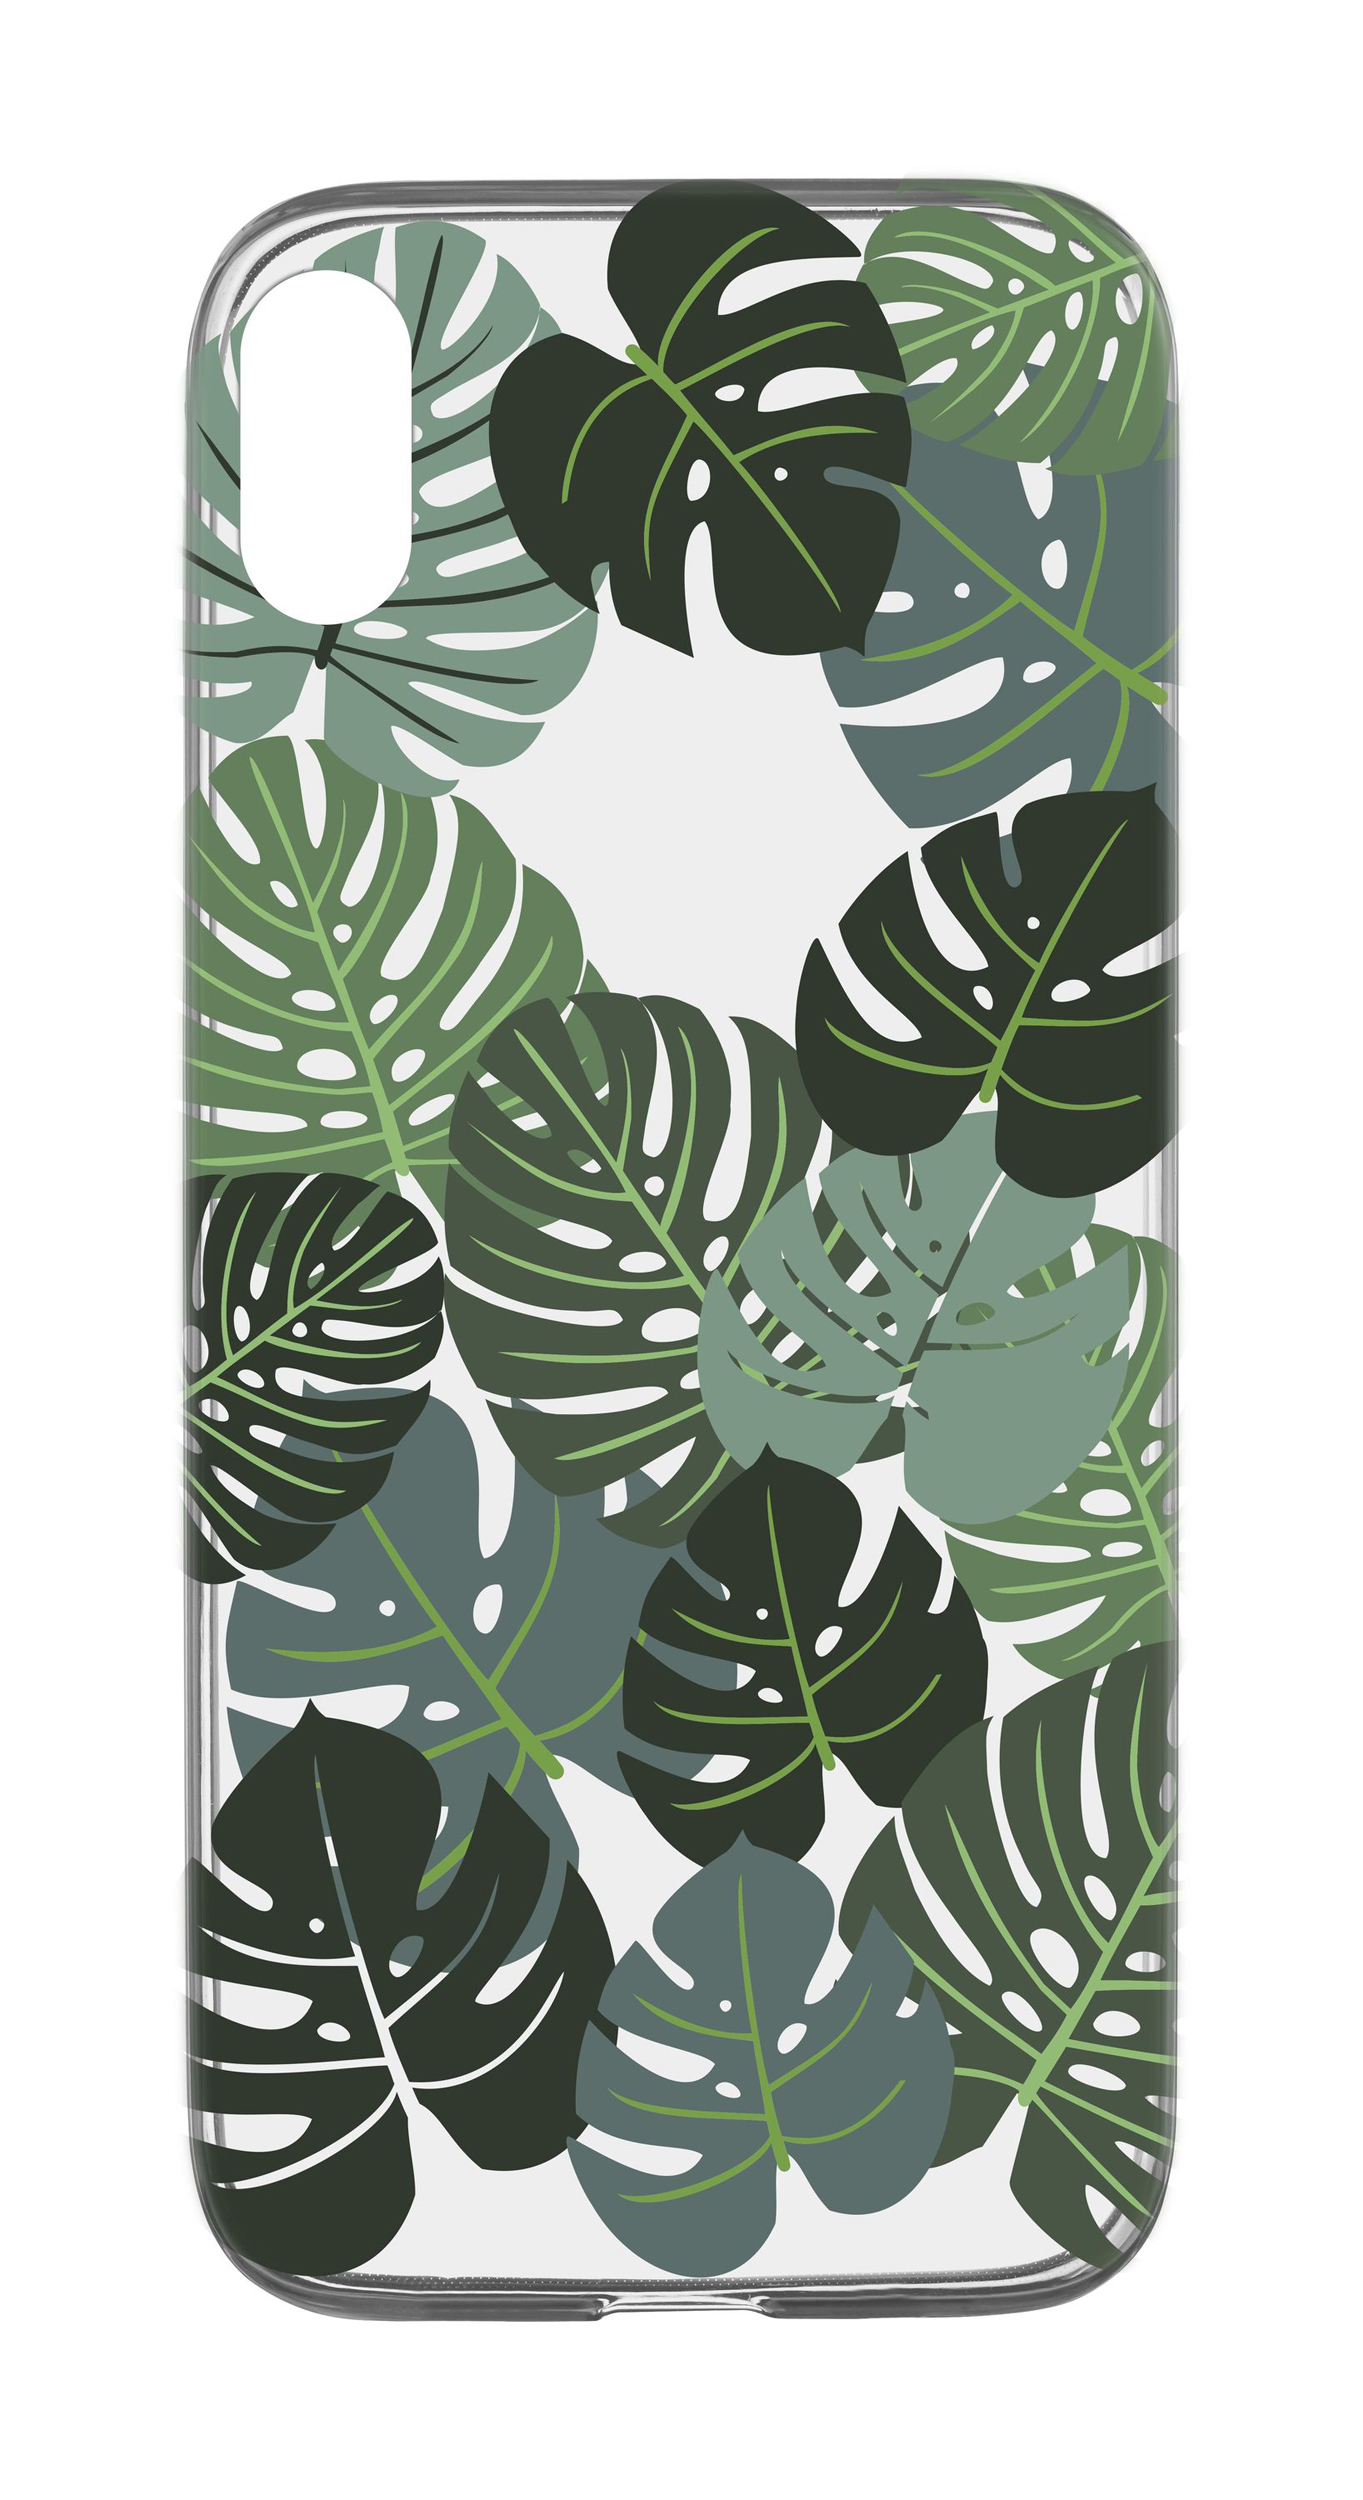 iPhone X/XS, case style, leaves